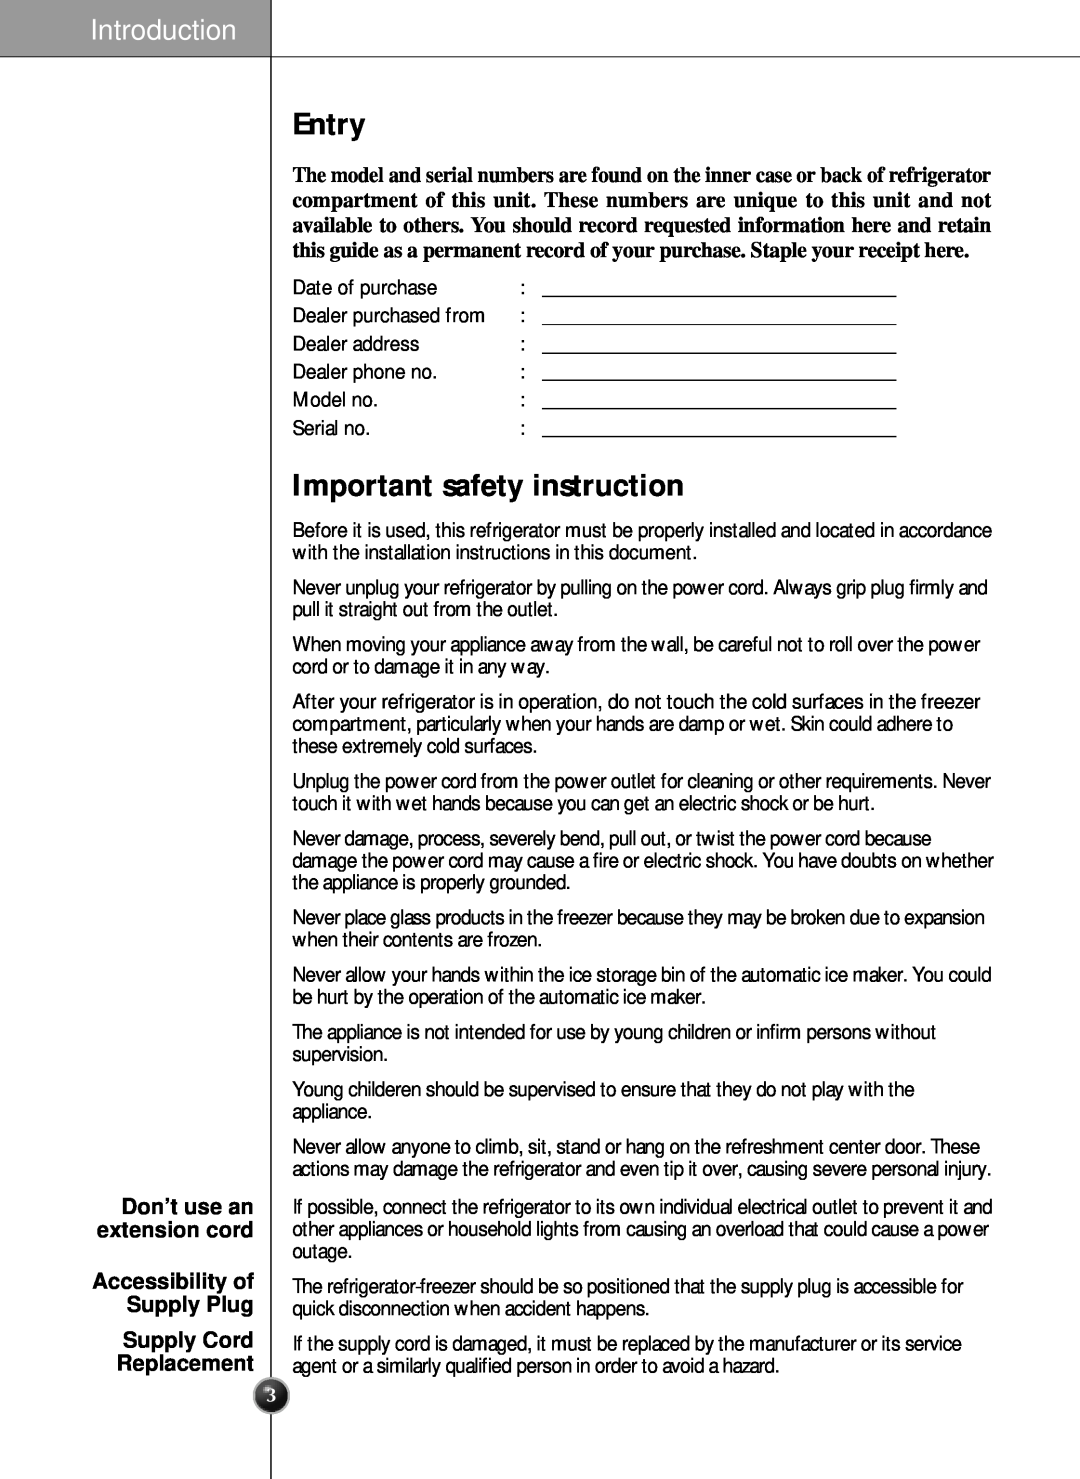 LG Electronics SXS manual Entry, Important safety instruction, Introduction, Supply Cord Replacement 